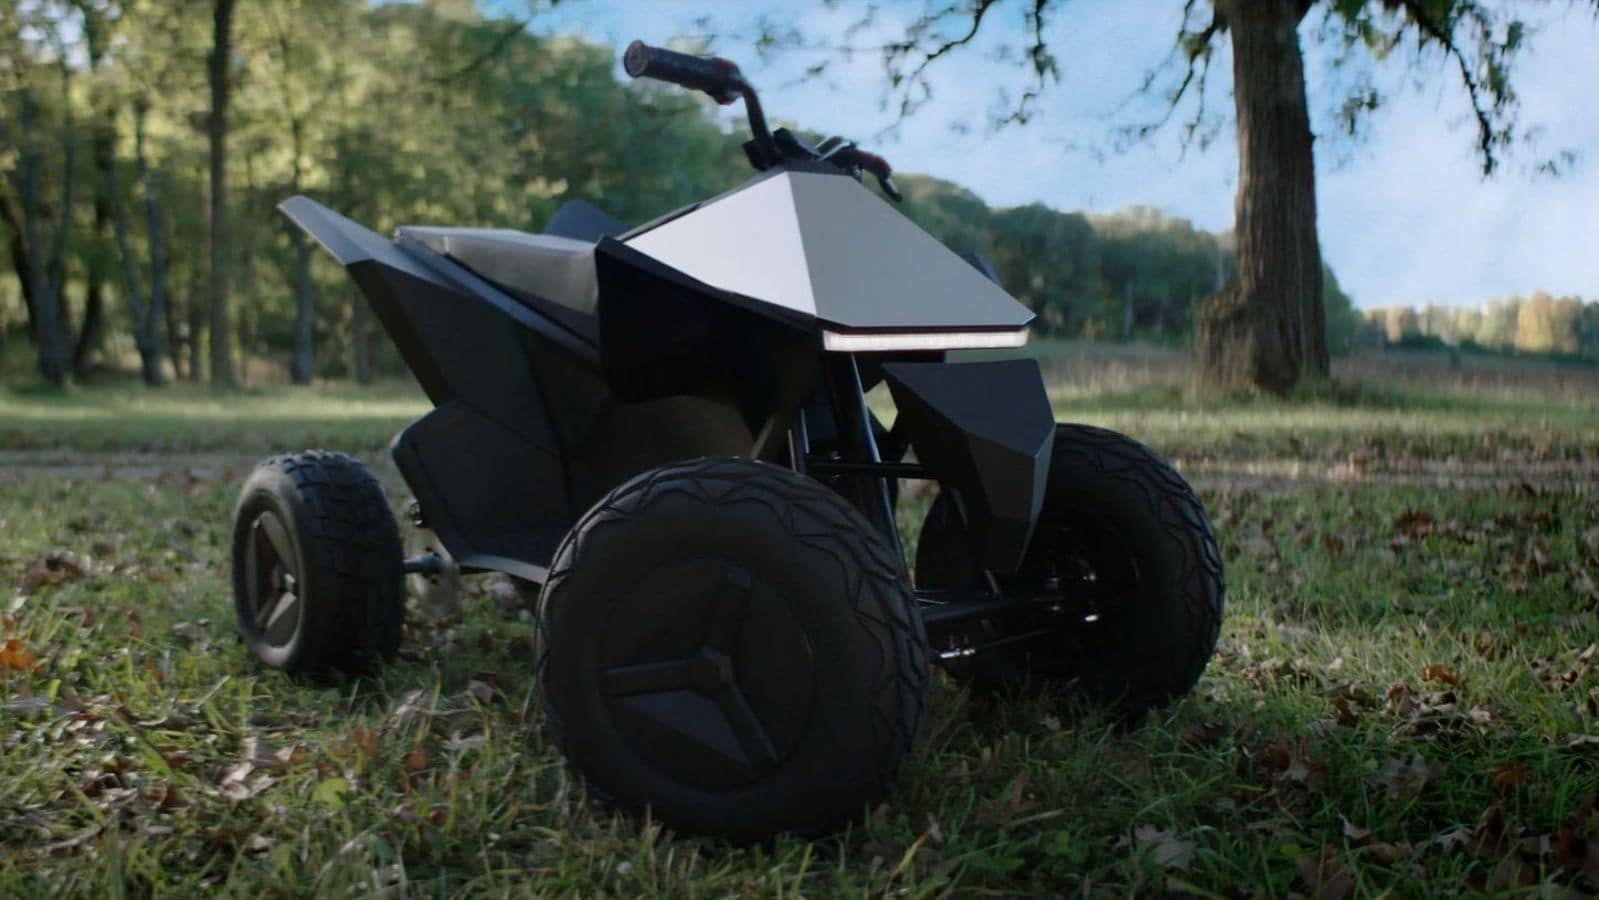 Tesla unveils Cyberquad for Kids, a Cybertruck-style electric ATV for kids